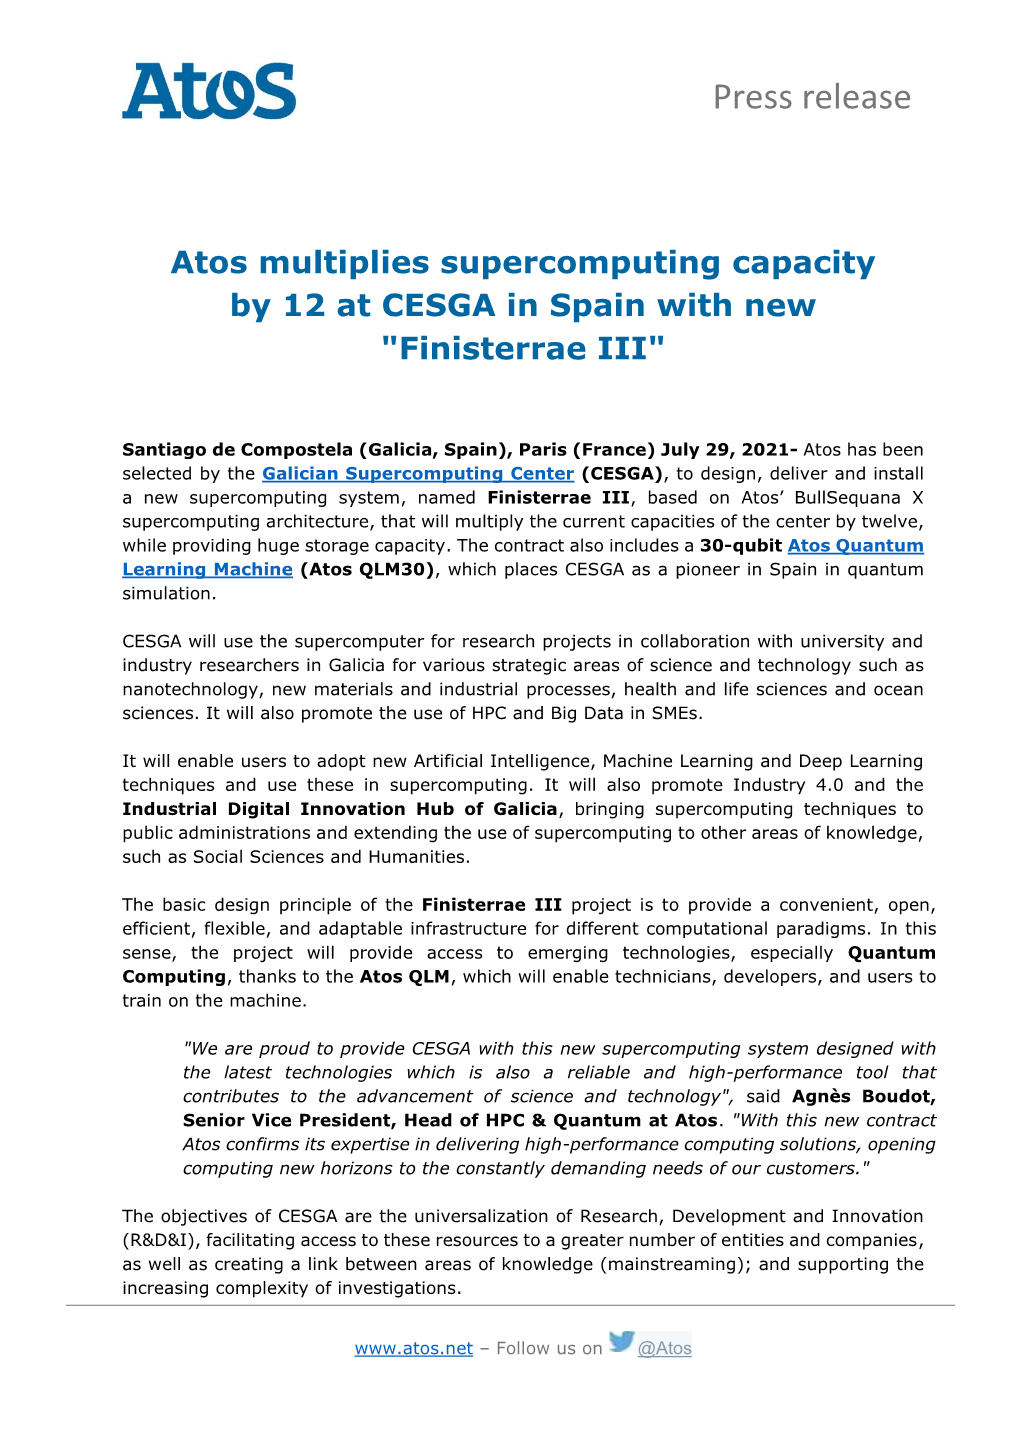 Atos Multiplies Supercomputing Capacity by 12 at CESGA in Spain with New "Finisterrae III"